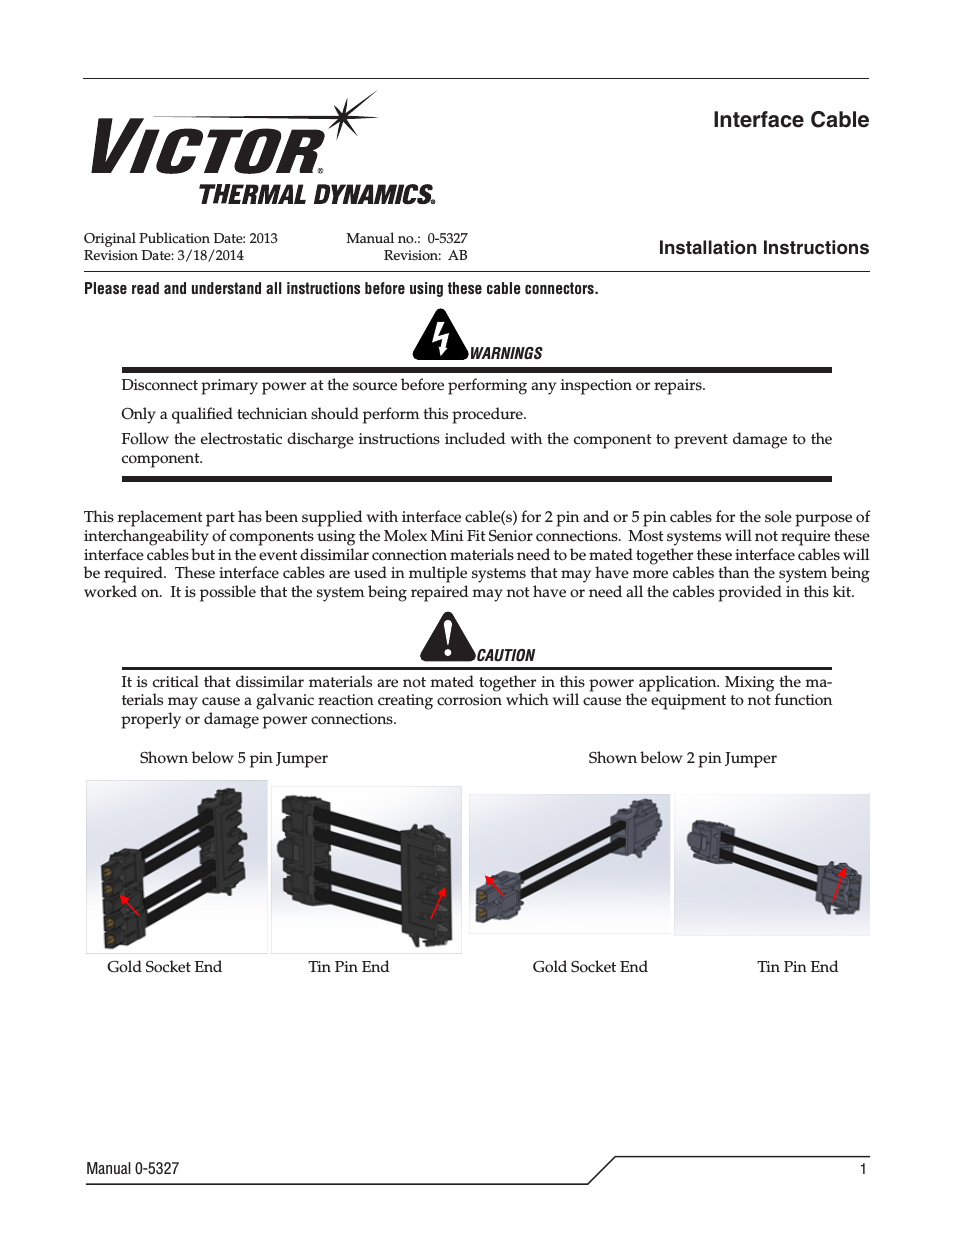 Victor Thermal Dynamics Interface Cable